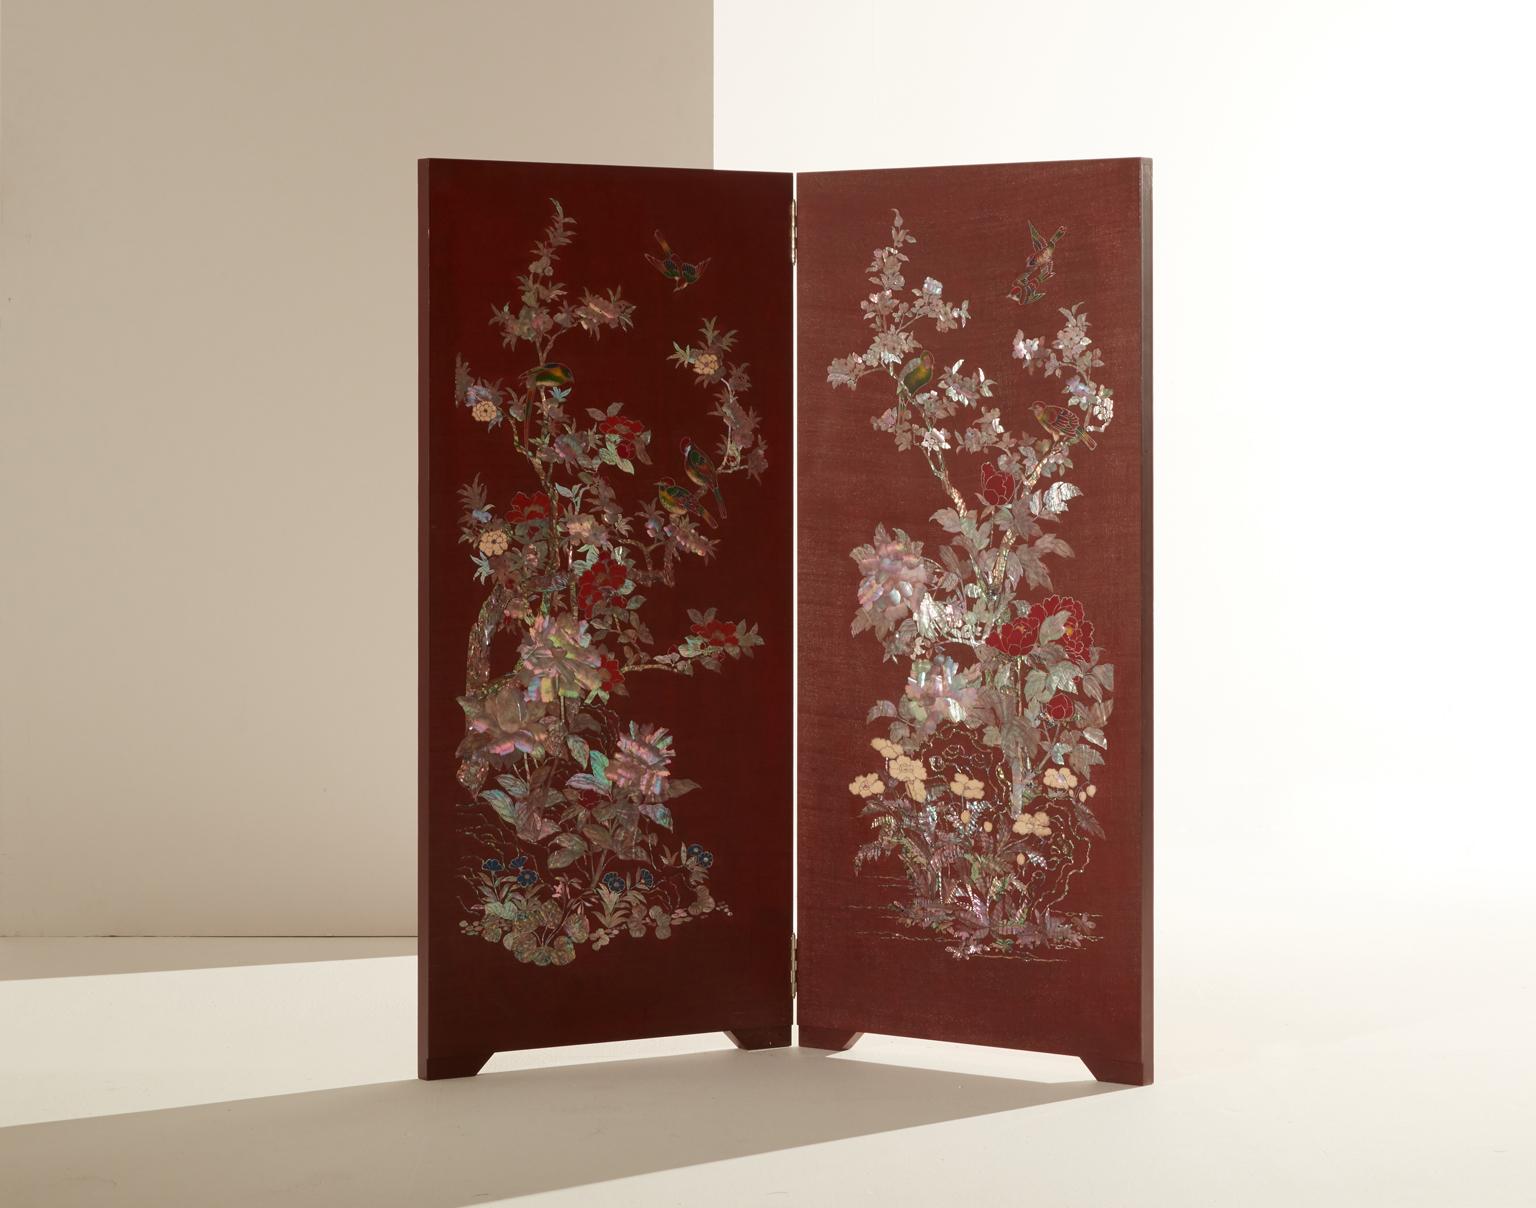 The folding screen, with a long history that stretches over 1,000 years from the Three Kingdoms of Korea, is now considered to be a space divider that serves various functions including the presentation of spaces and decorative characteristics, thus